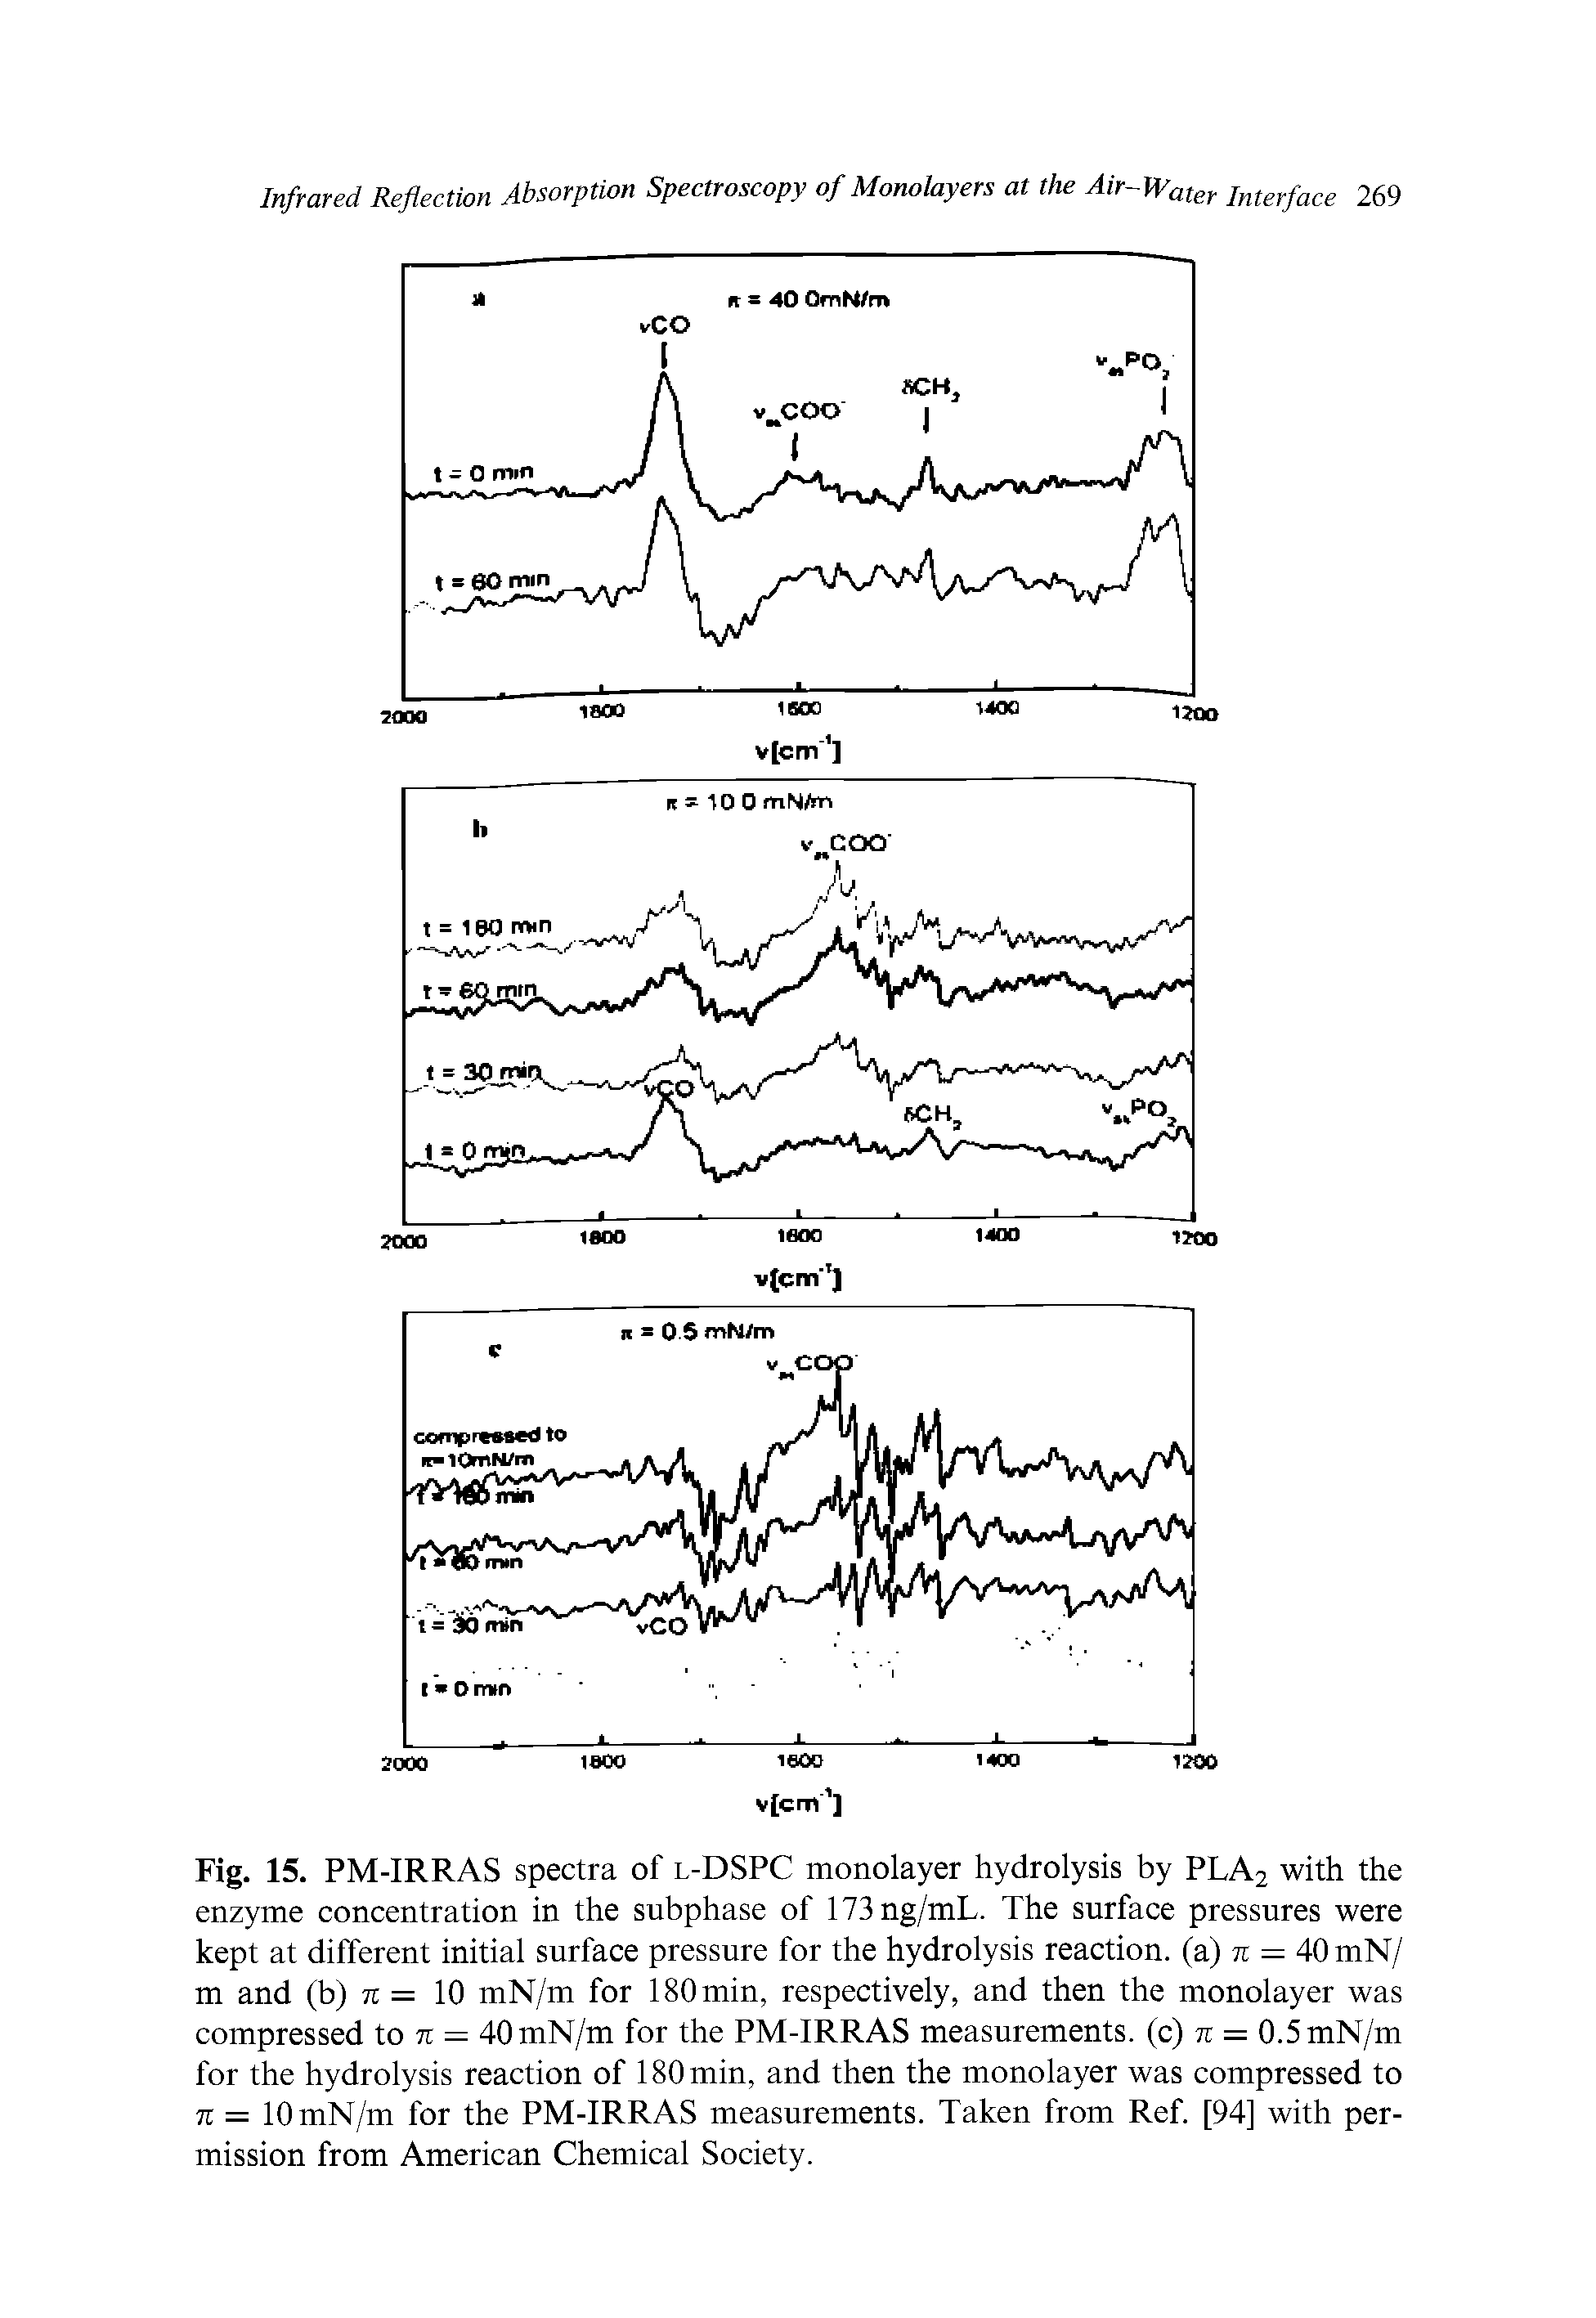 Fig. 15. PM-IRRAS spectra of l-DSPC monolayer hydrolysis by PLA2 with the enzyme concentration in the subphase of 173ng/mL. The surface pressures were kept at different initial surface pressure for the hydrolysis reaction, (a) % — 40 mN/ m and (b) n — 10 mN/m for 180min, respectively, and then the monolayer was compressed to % — 40 mN/m for the PM-IRRAS measurements, (c) % — 0.5 mN/m for the hydrolysis reaction of 180 min, and then the monolayer was compressed to % — 10 mN/m for the PM-IRRAS measurements. Taken from Ref. [94] with permission from American Chemical Society.